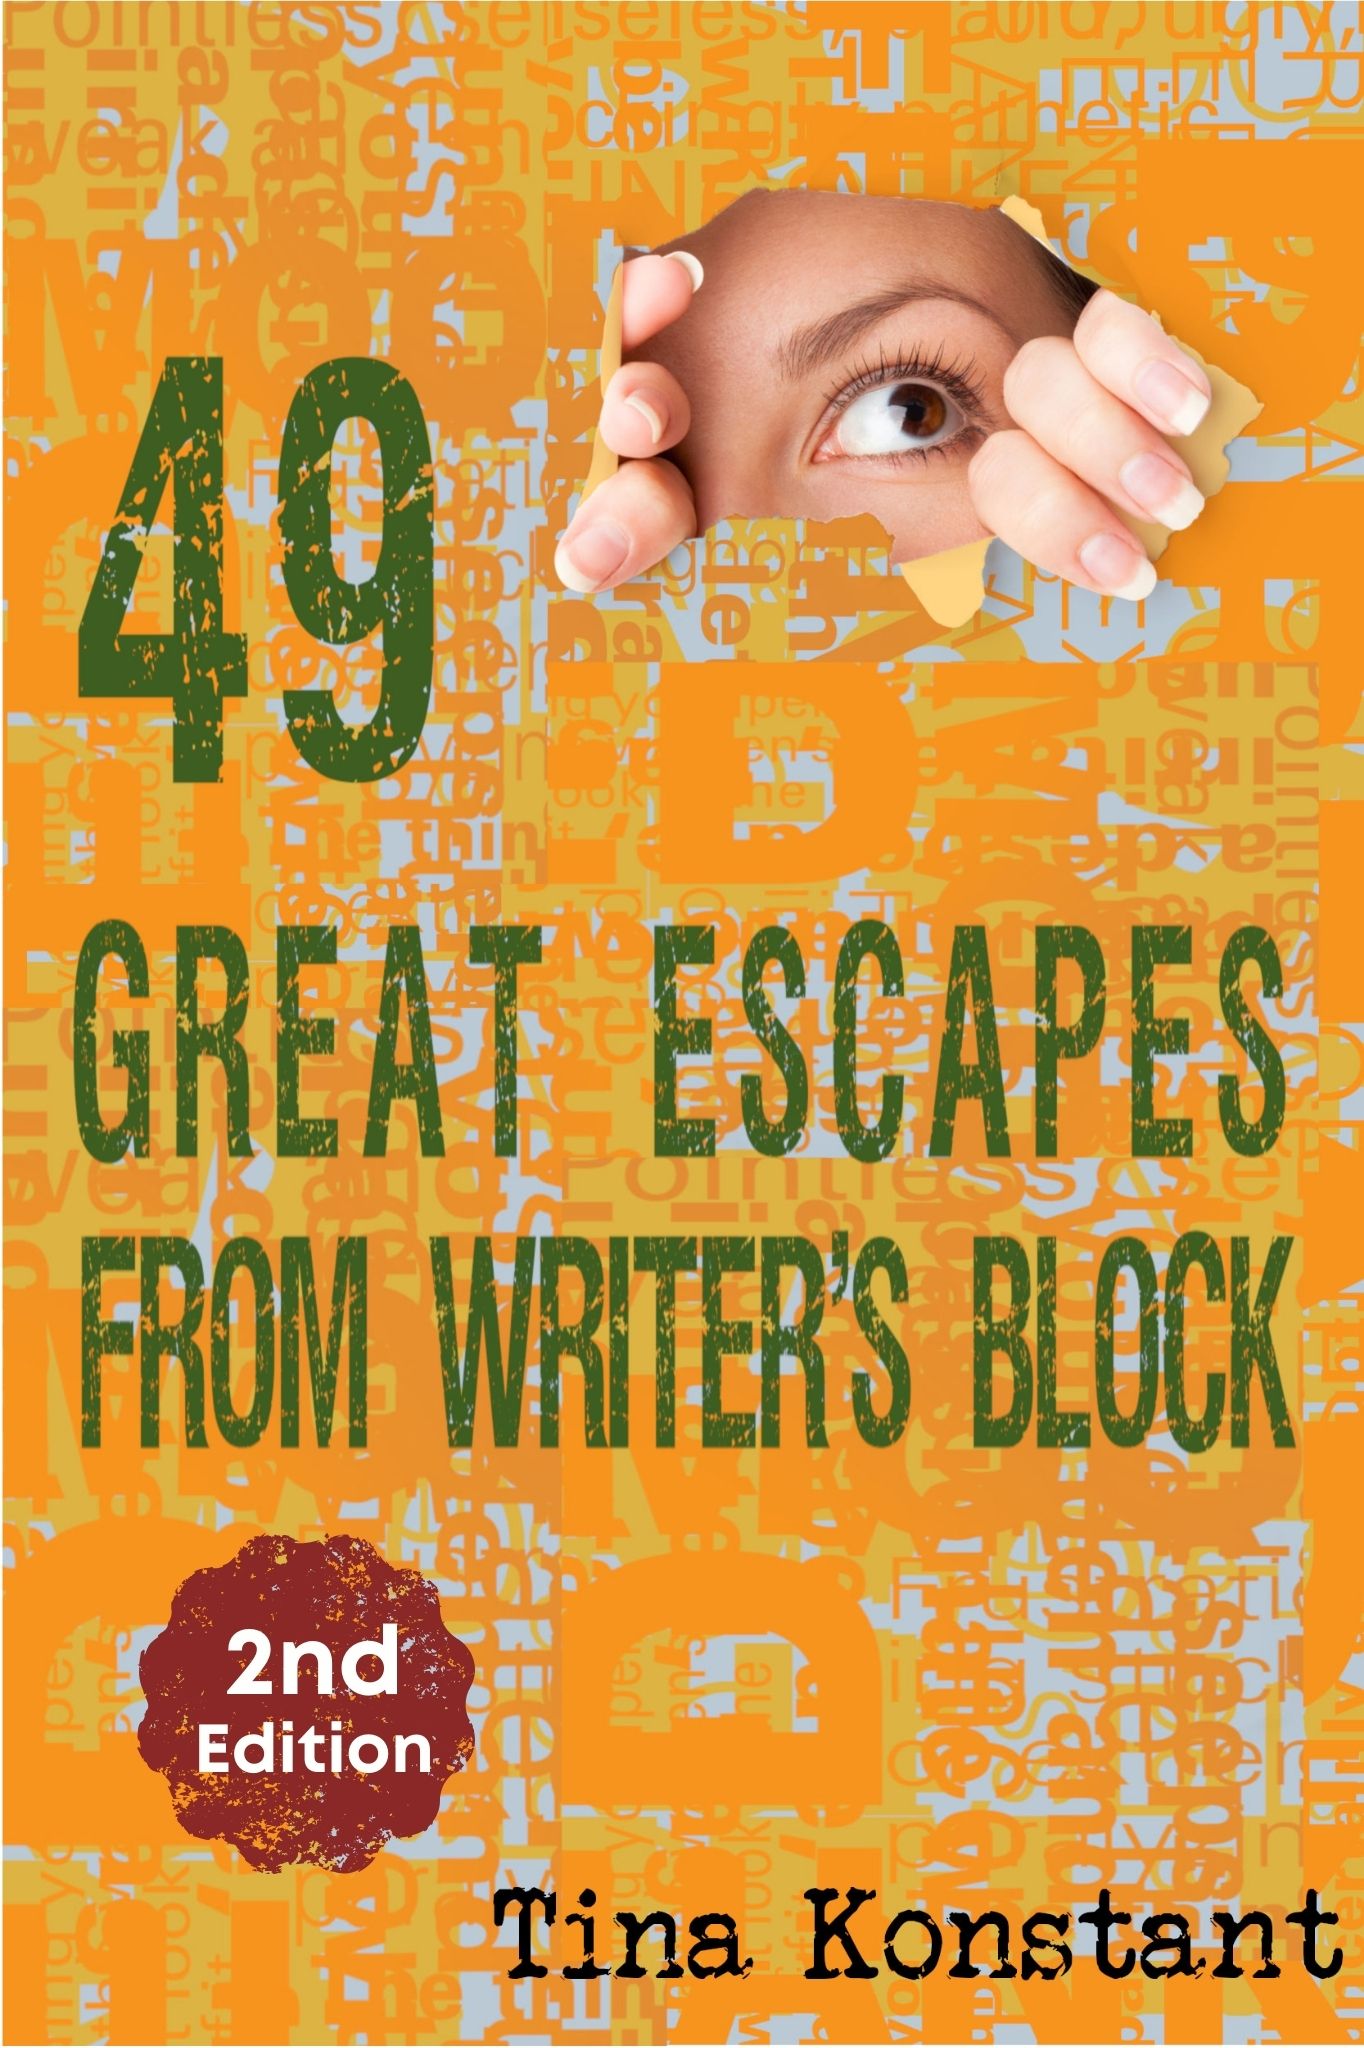 49 Great Escapes from Writer's Block by Tina Konstant